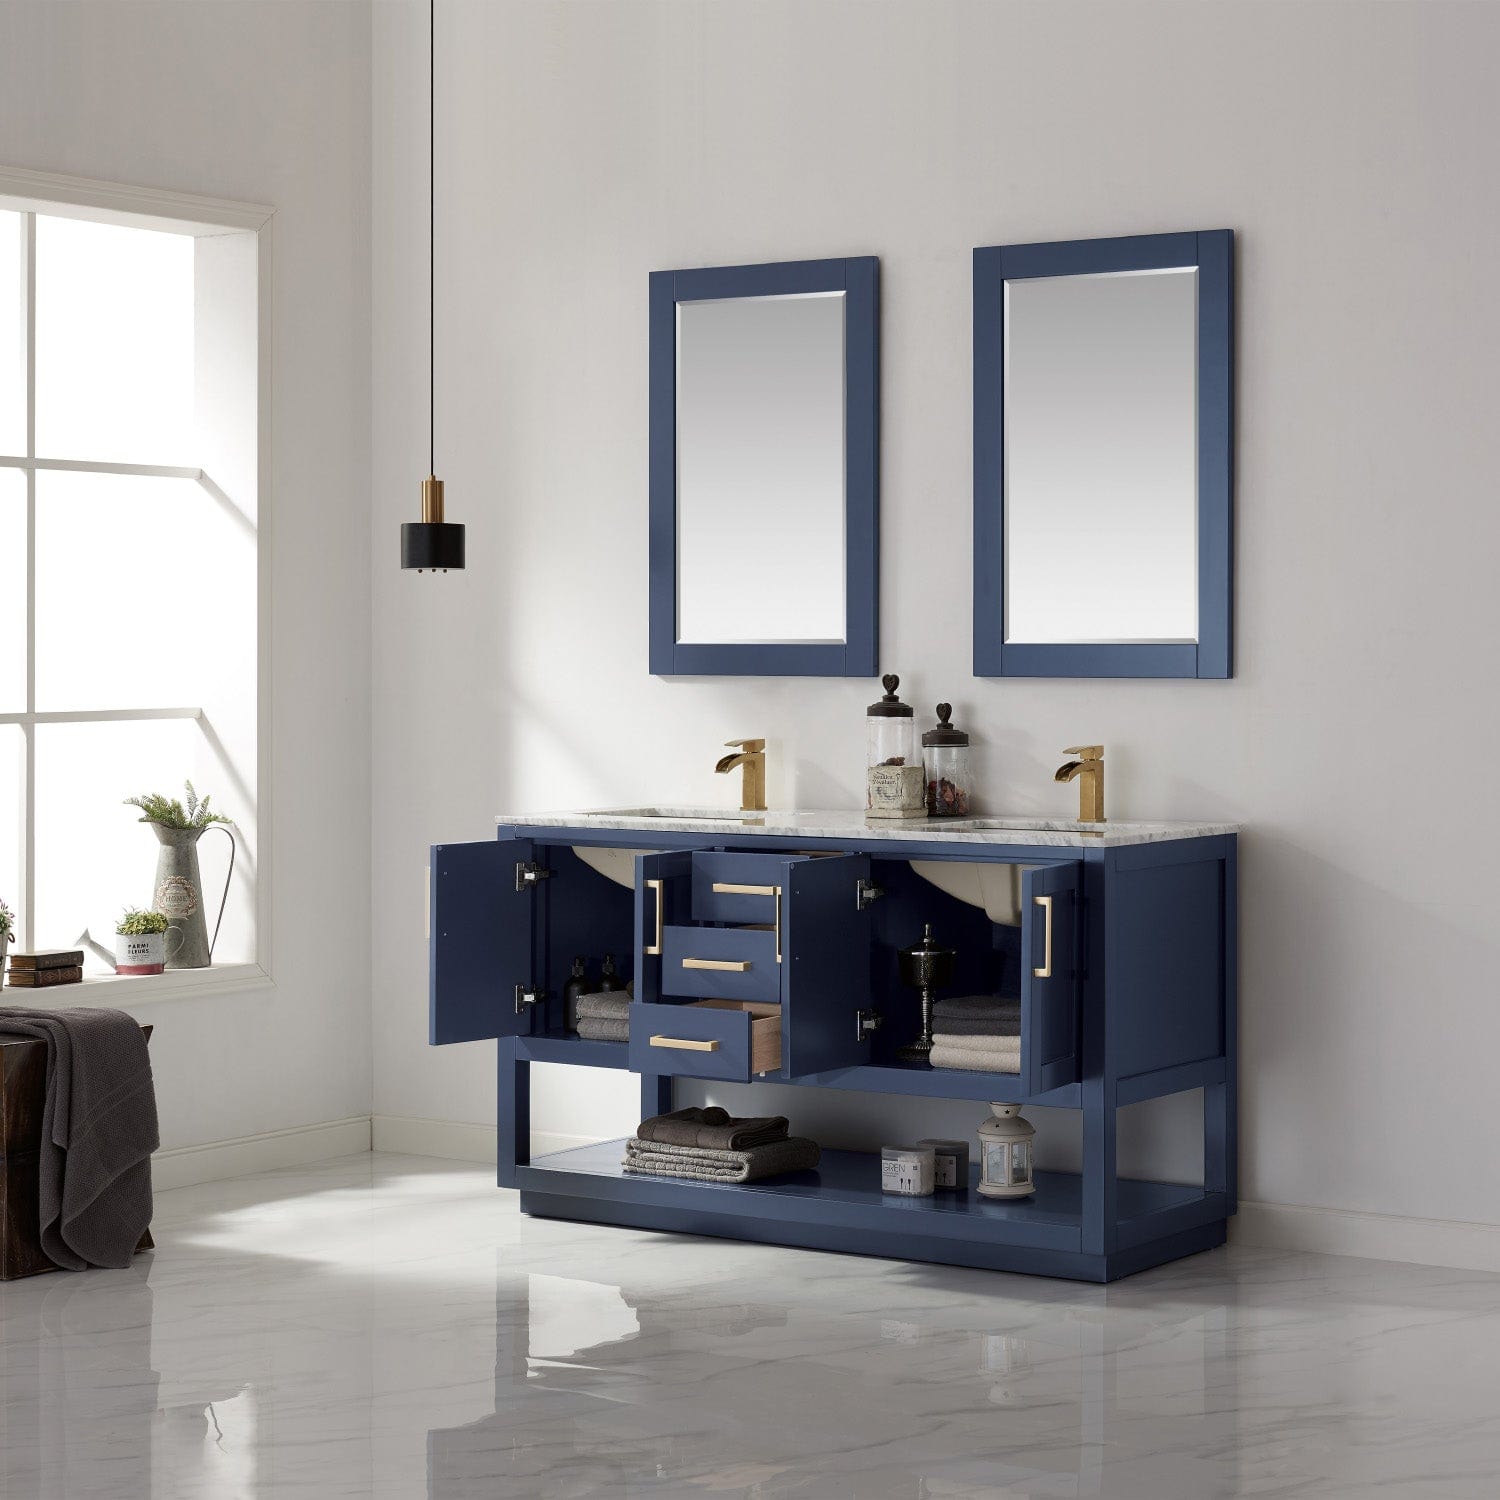 Altair Remi 60" Double Bathroom Vanity Set in Royal Blue and Carrara White Marble Countertop with Mirror 532060-RB-CA - Molaix631112971539Vanity532060-RB-CA